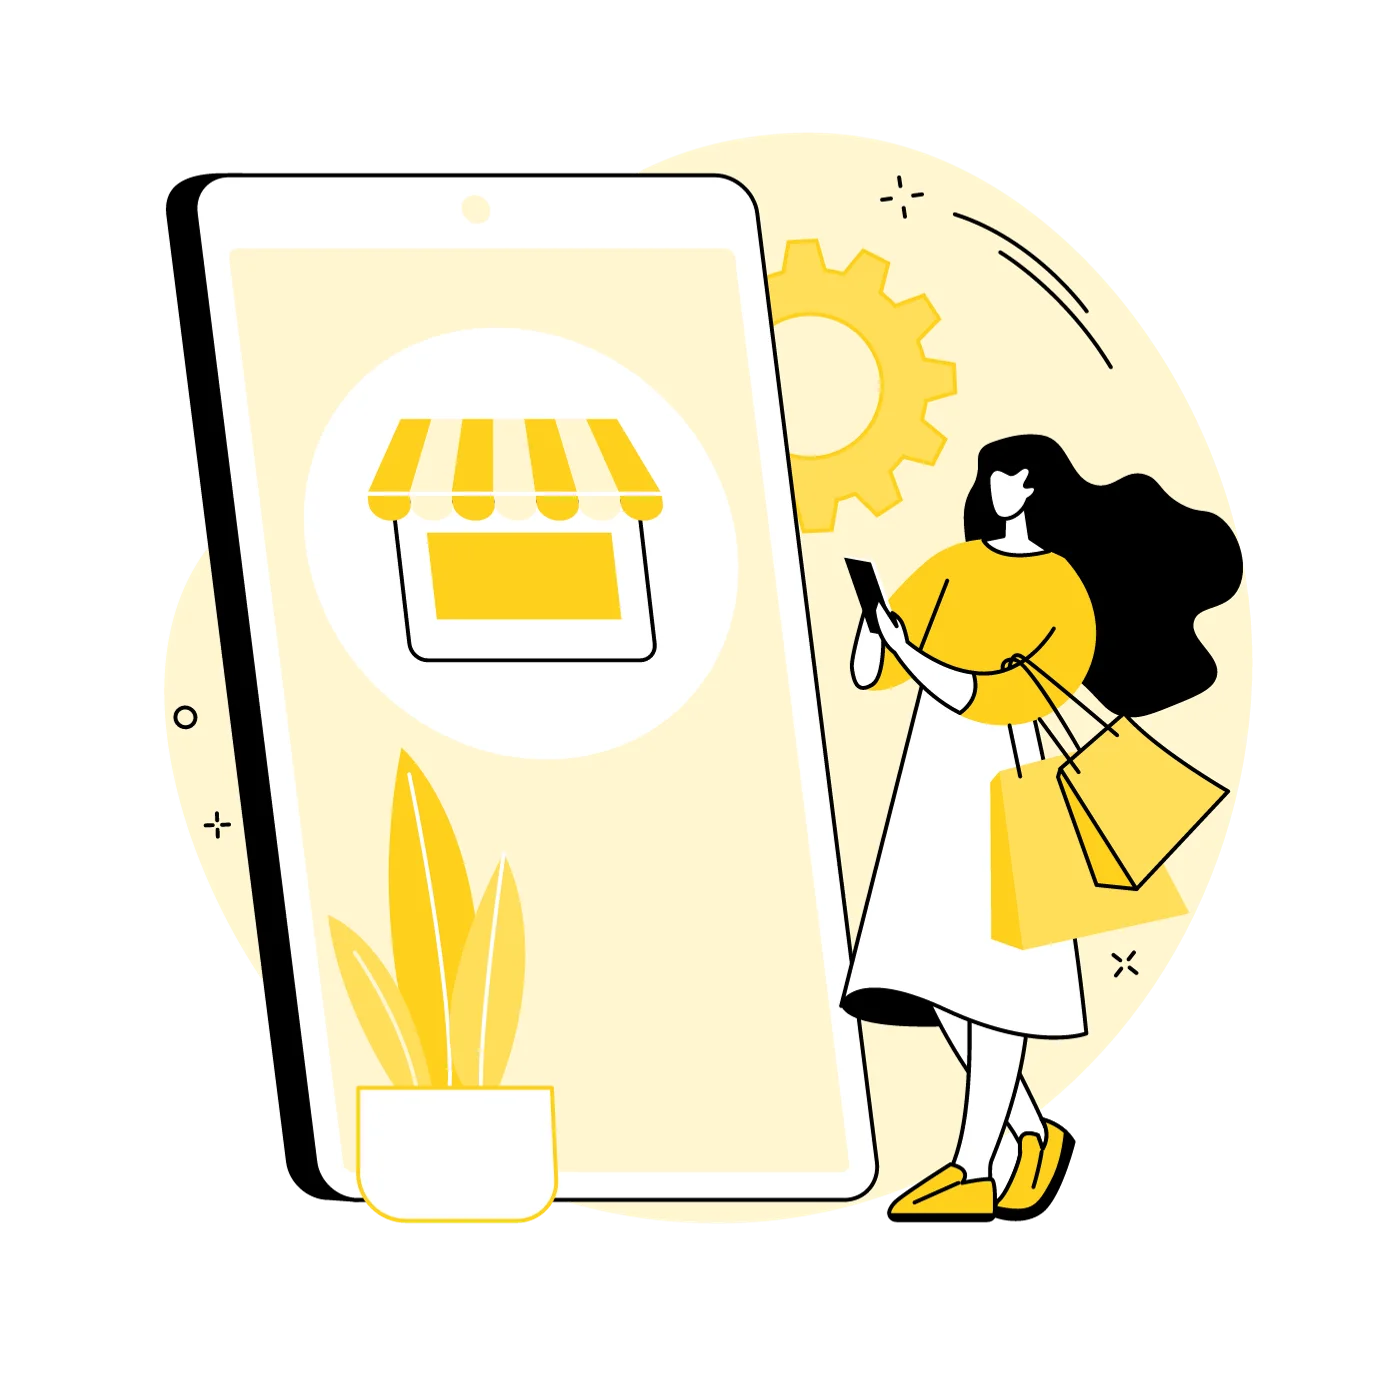 Phone in hand, wallet open! This shopper's got her finger on the pulse of e-commerce, scoring deals and steals with every tap. E-commerce marketing makes shopping a fingertip fiesta!